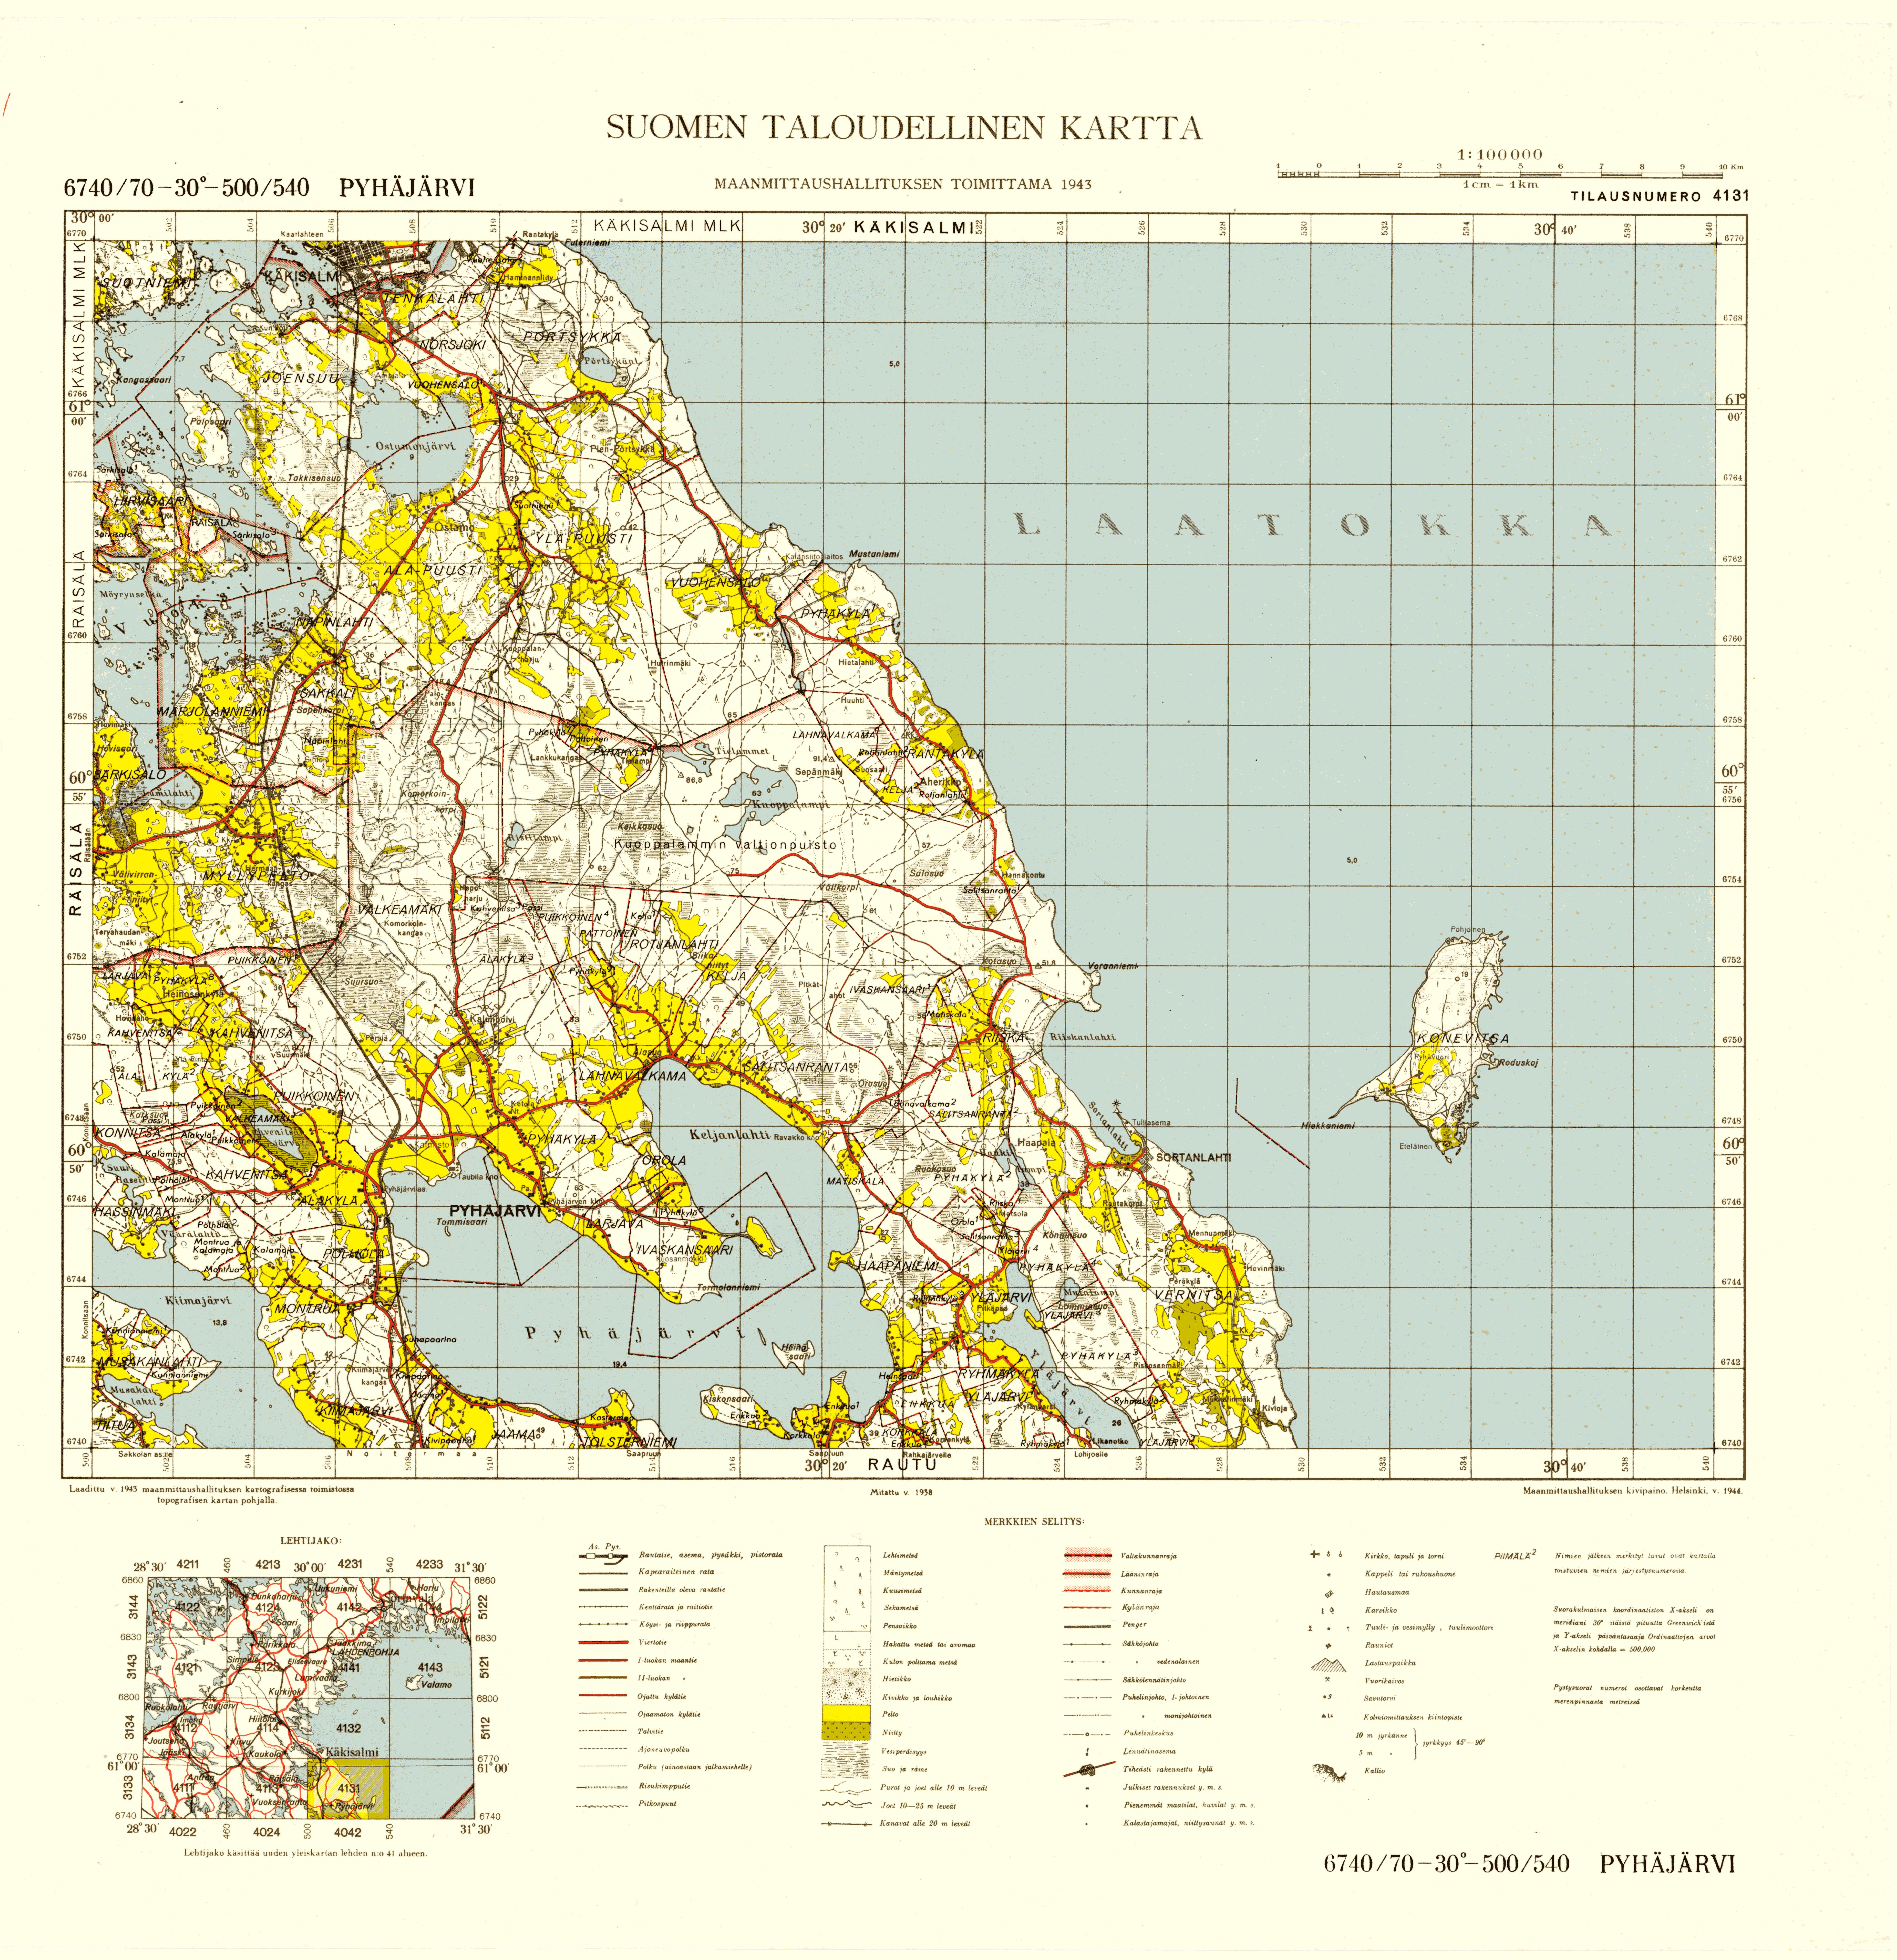 Plodovoje. Pyhäjärvi. Taloudellinen kartta 4131. Economic map from 1944. Use the zooming tool to explore in higher level of detail. Obtain as a quality print or high resolution image